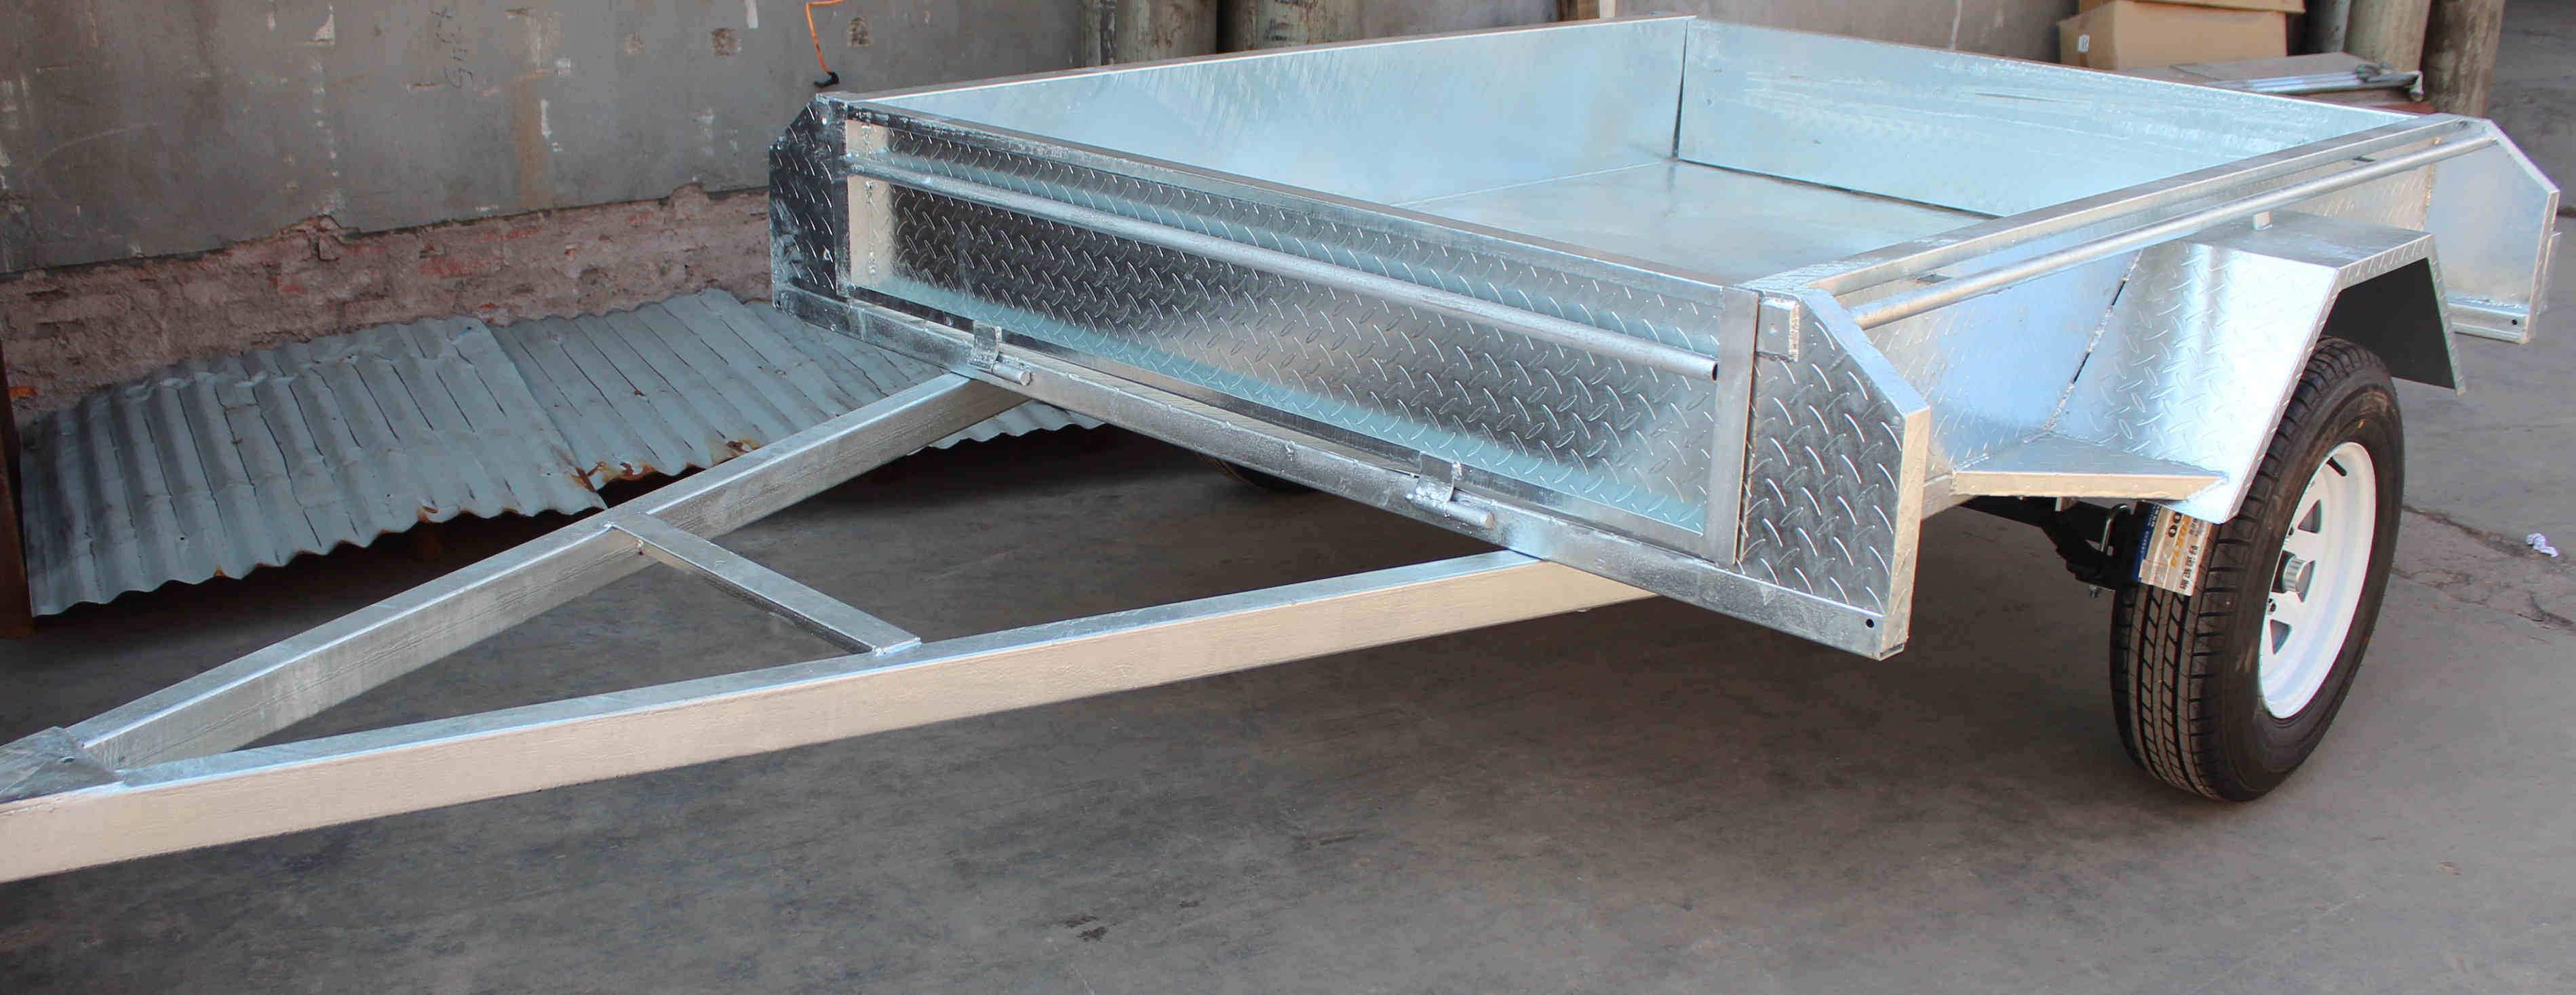 Ly-601 Hot Dipped Galvanized Strong Box Trailers